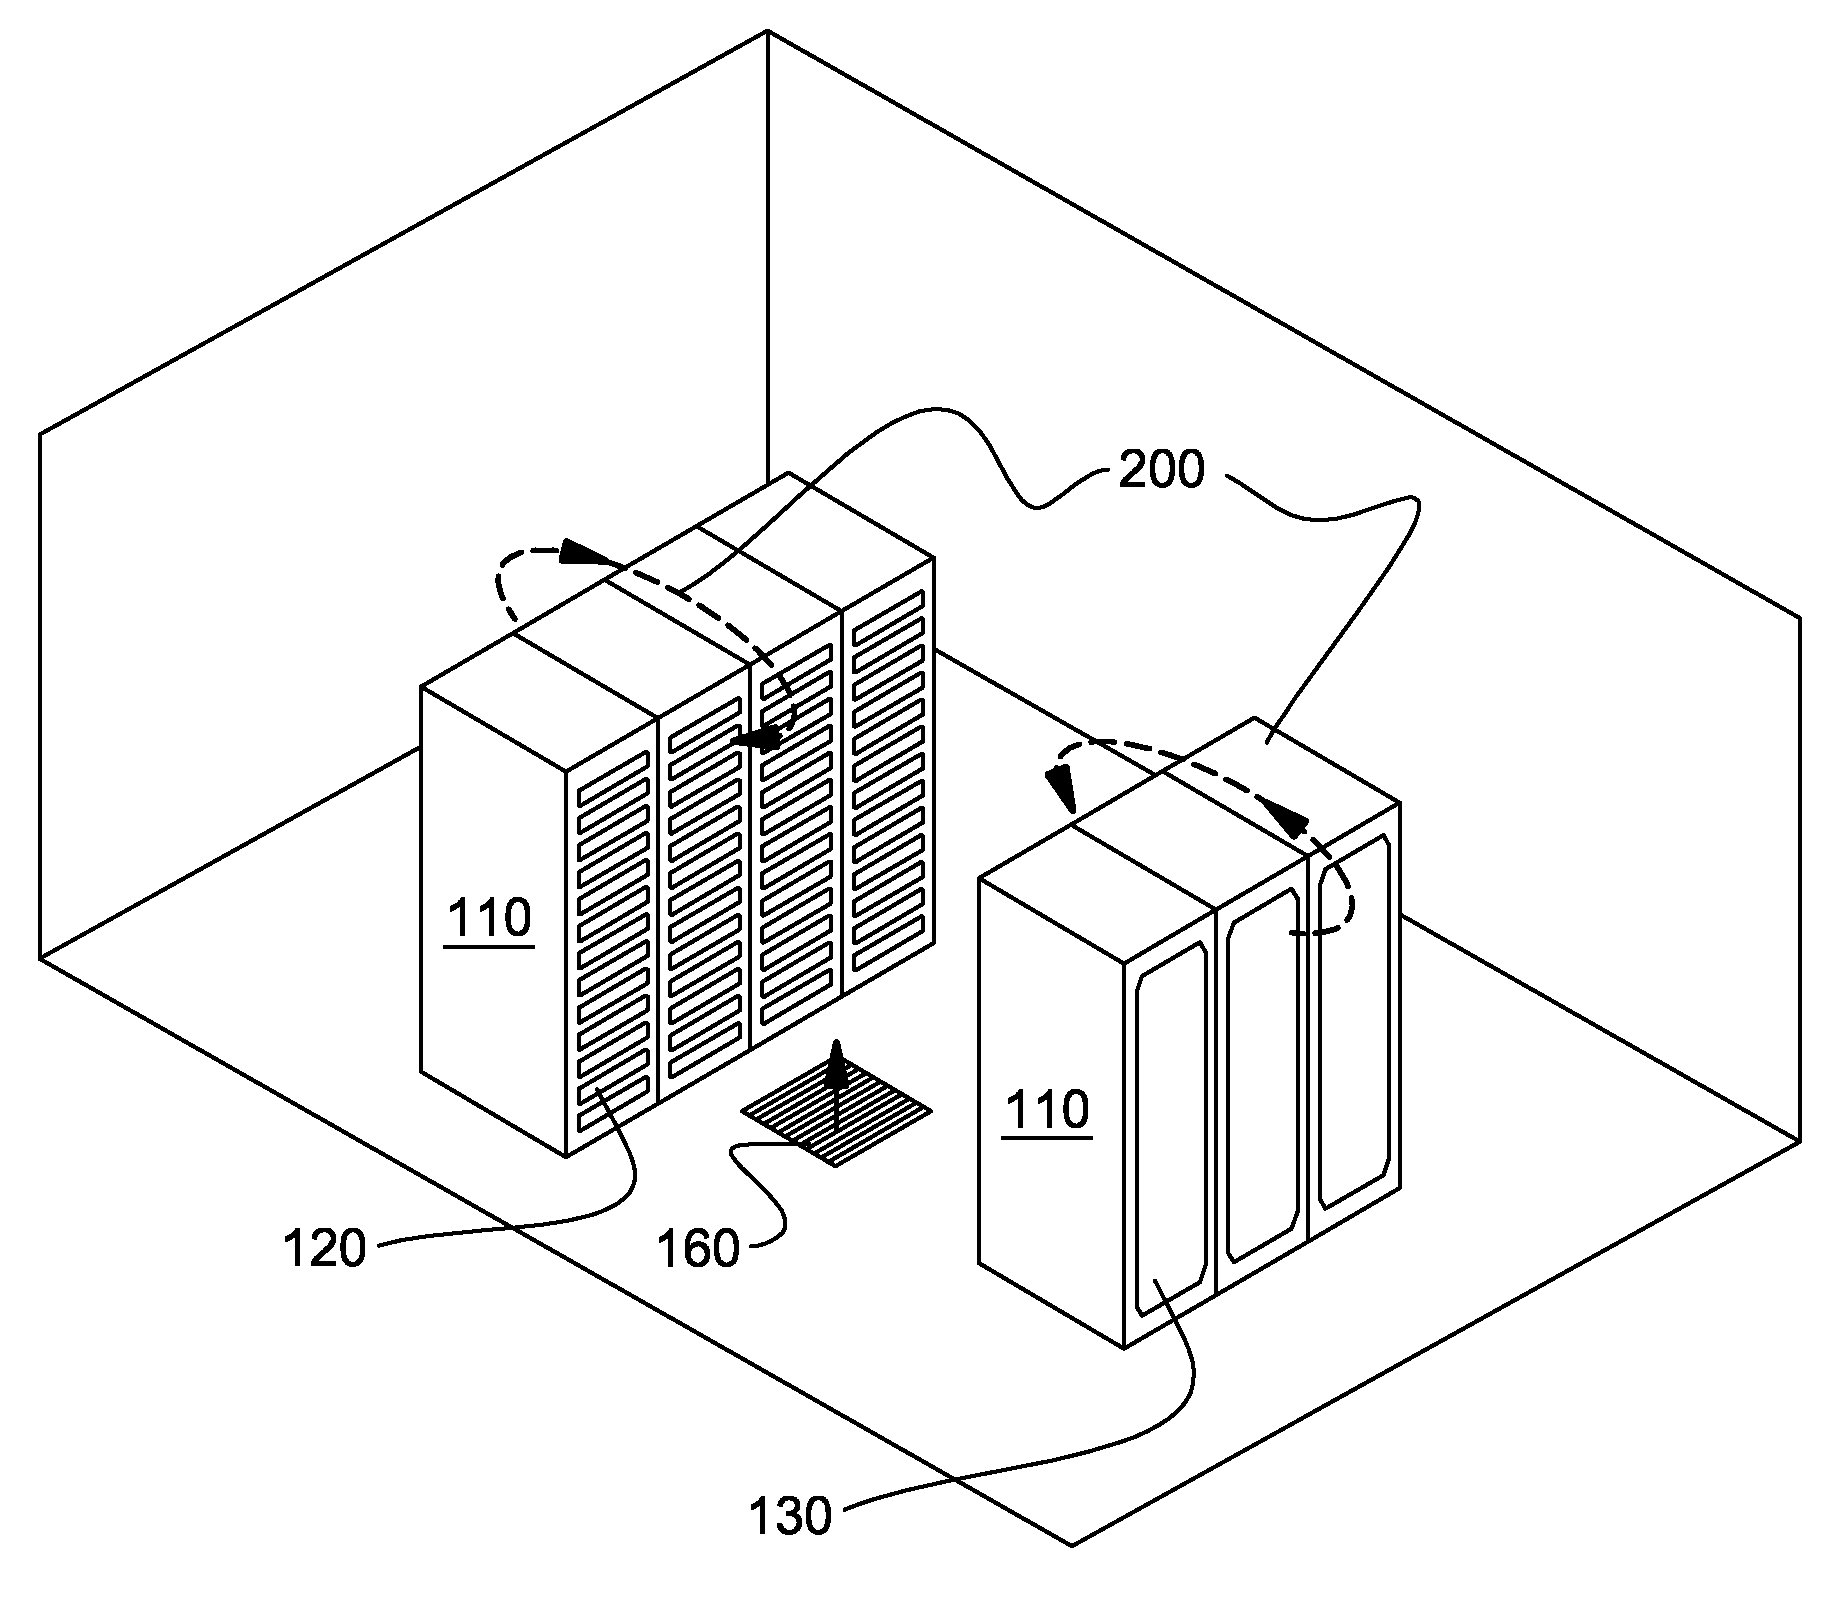 Hybrid air and liquid coolant conditioning unit for facilitaating cooling of one or more electronics racks of a data center